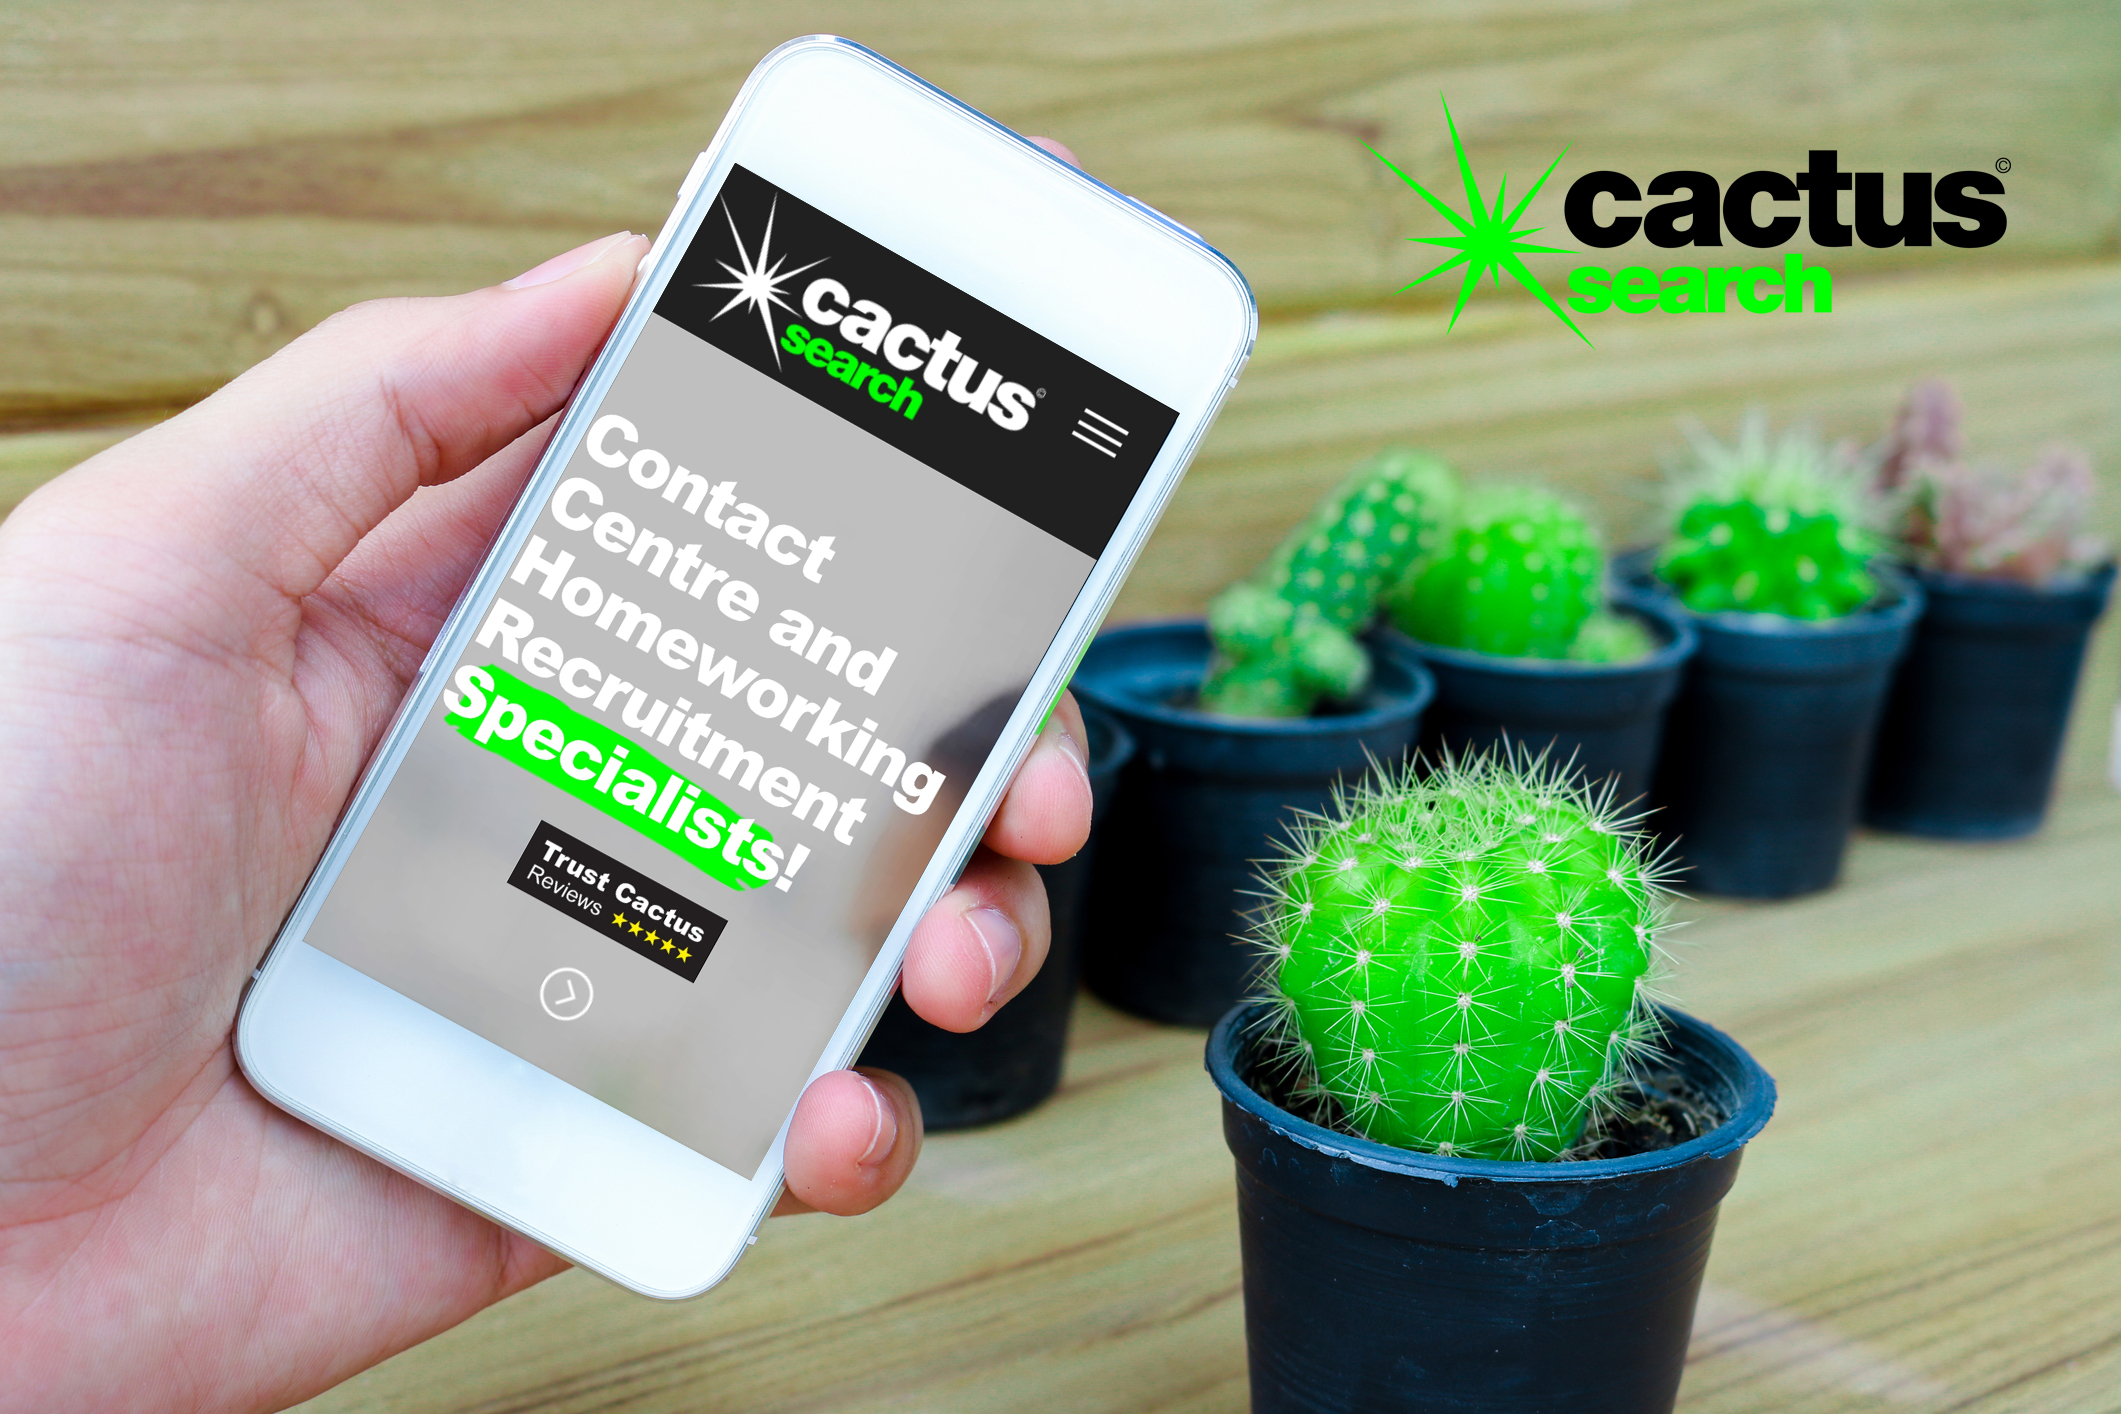 Cactussearch